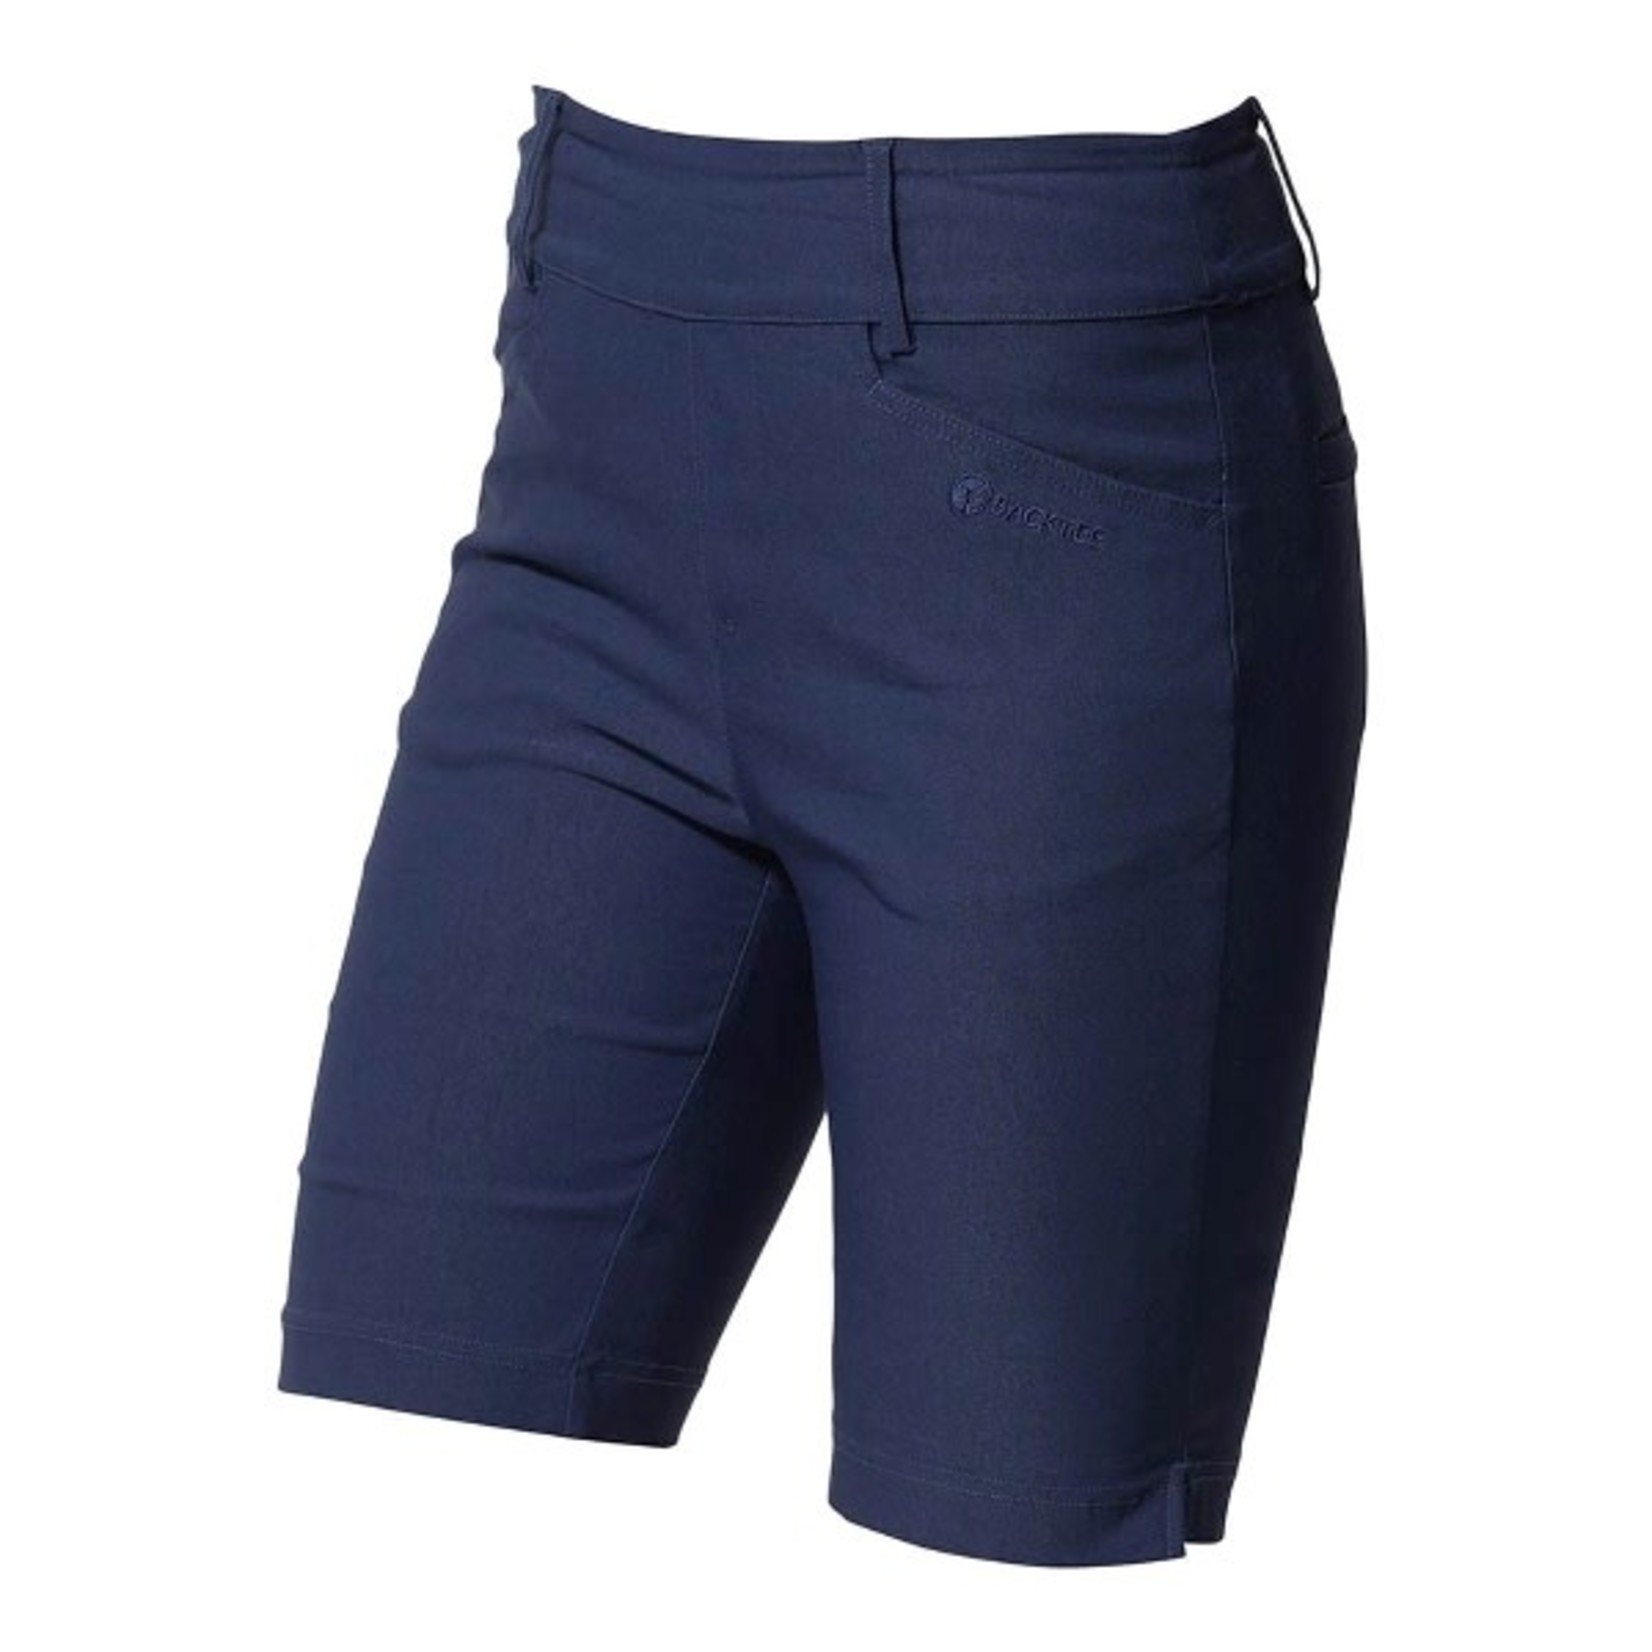 Backtee Backtee Ladies Super Stretch Shorts Navy